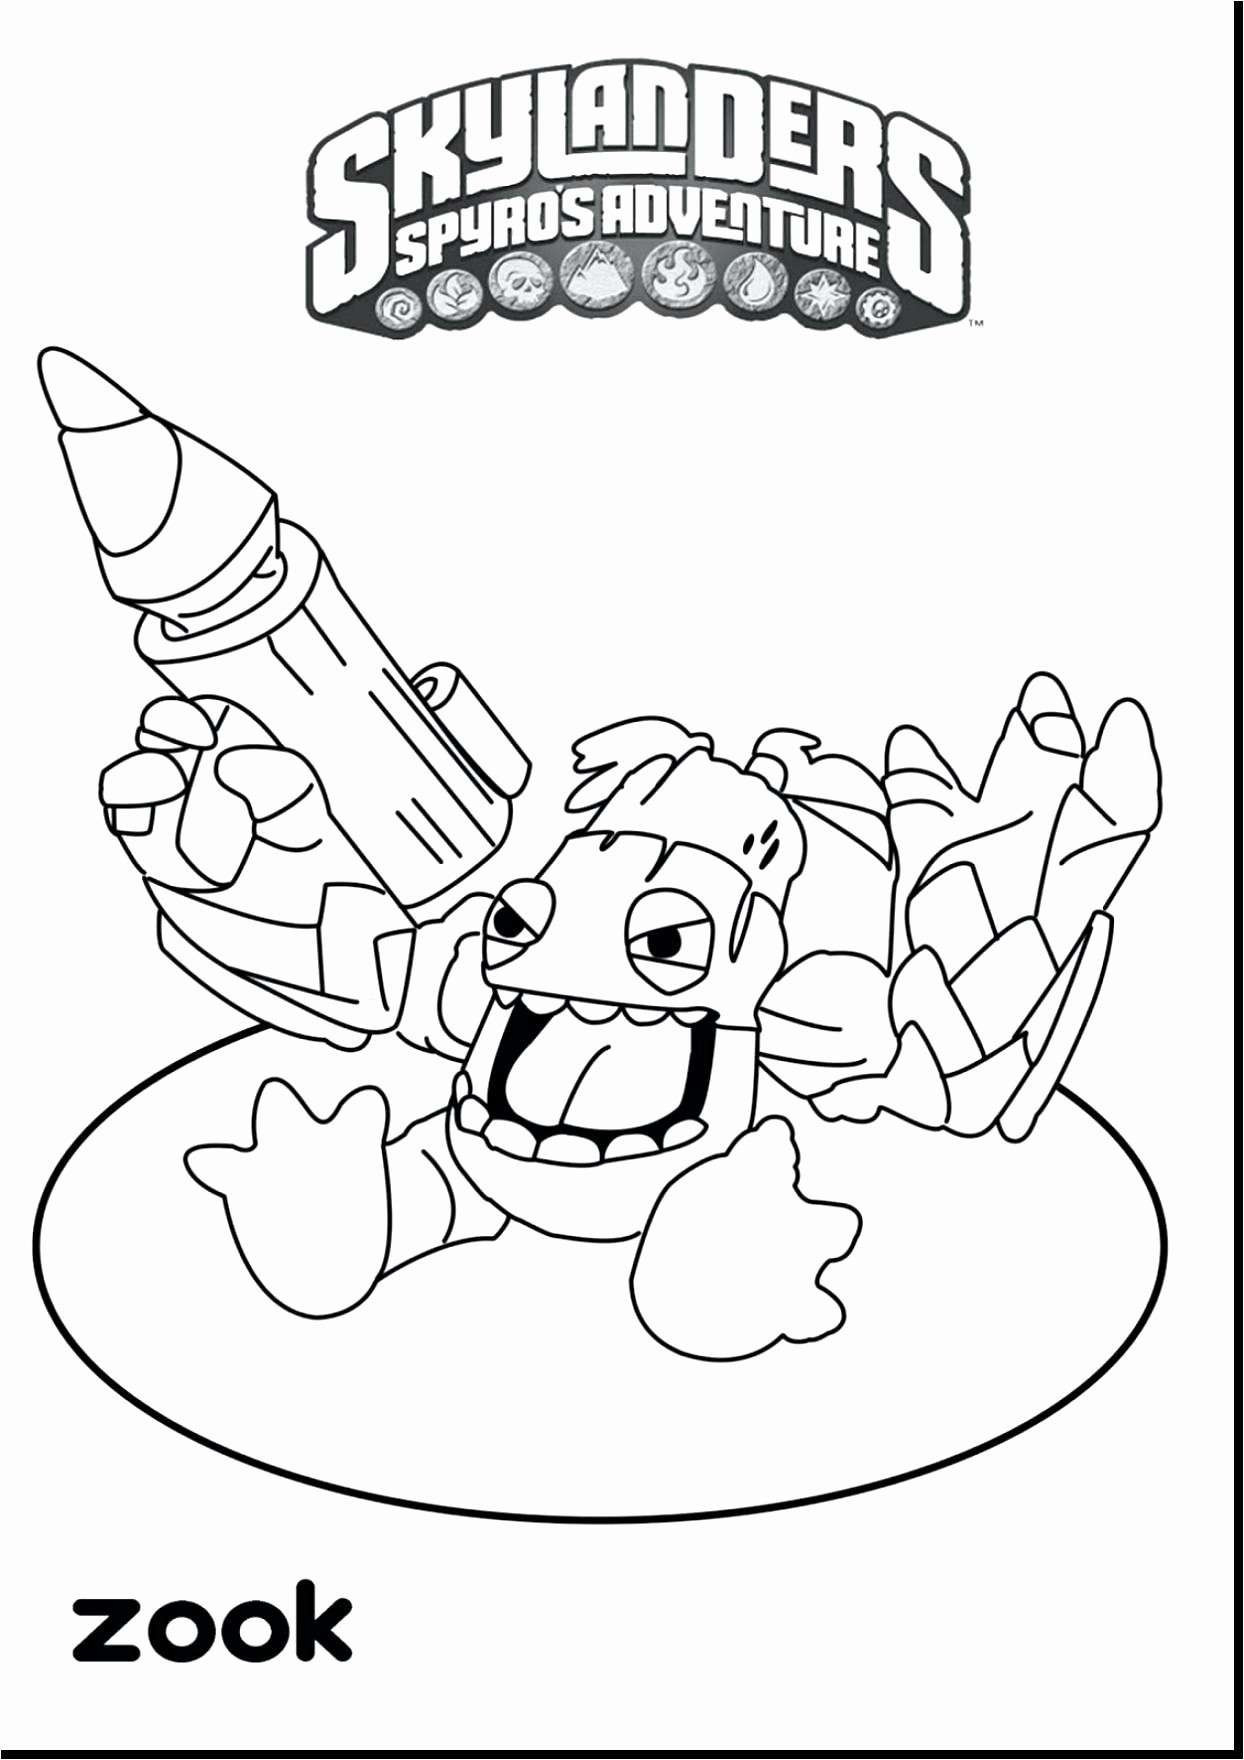 Lollipop Coloring Page Coloring Lollipop Coloring Page Free Printable Pages Throughout